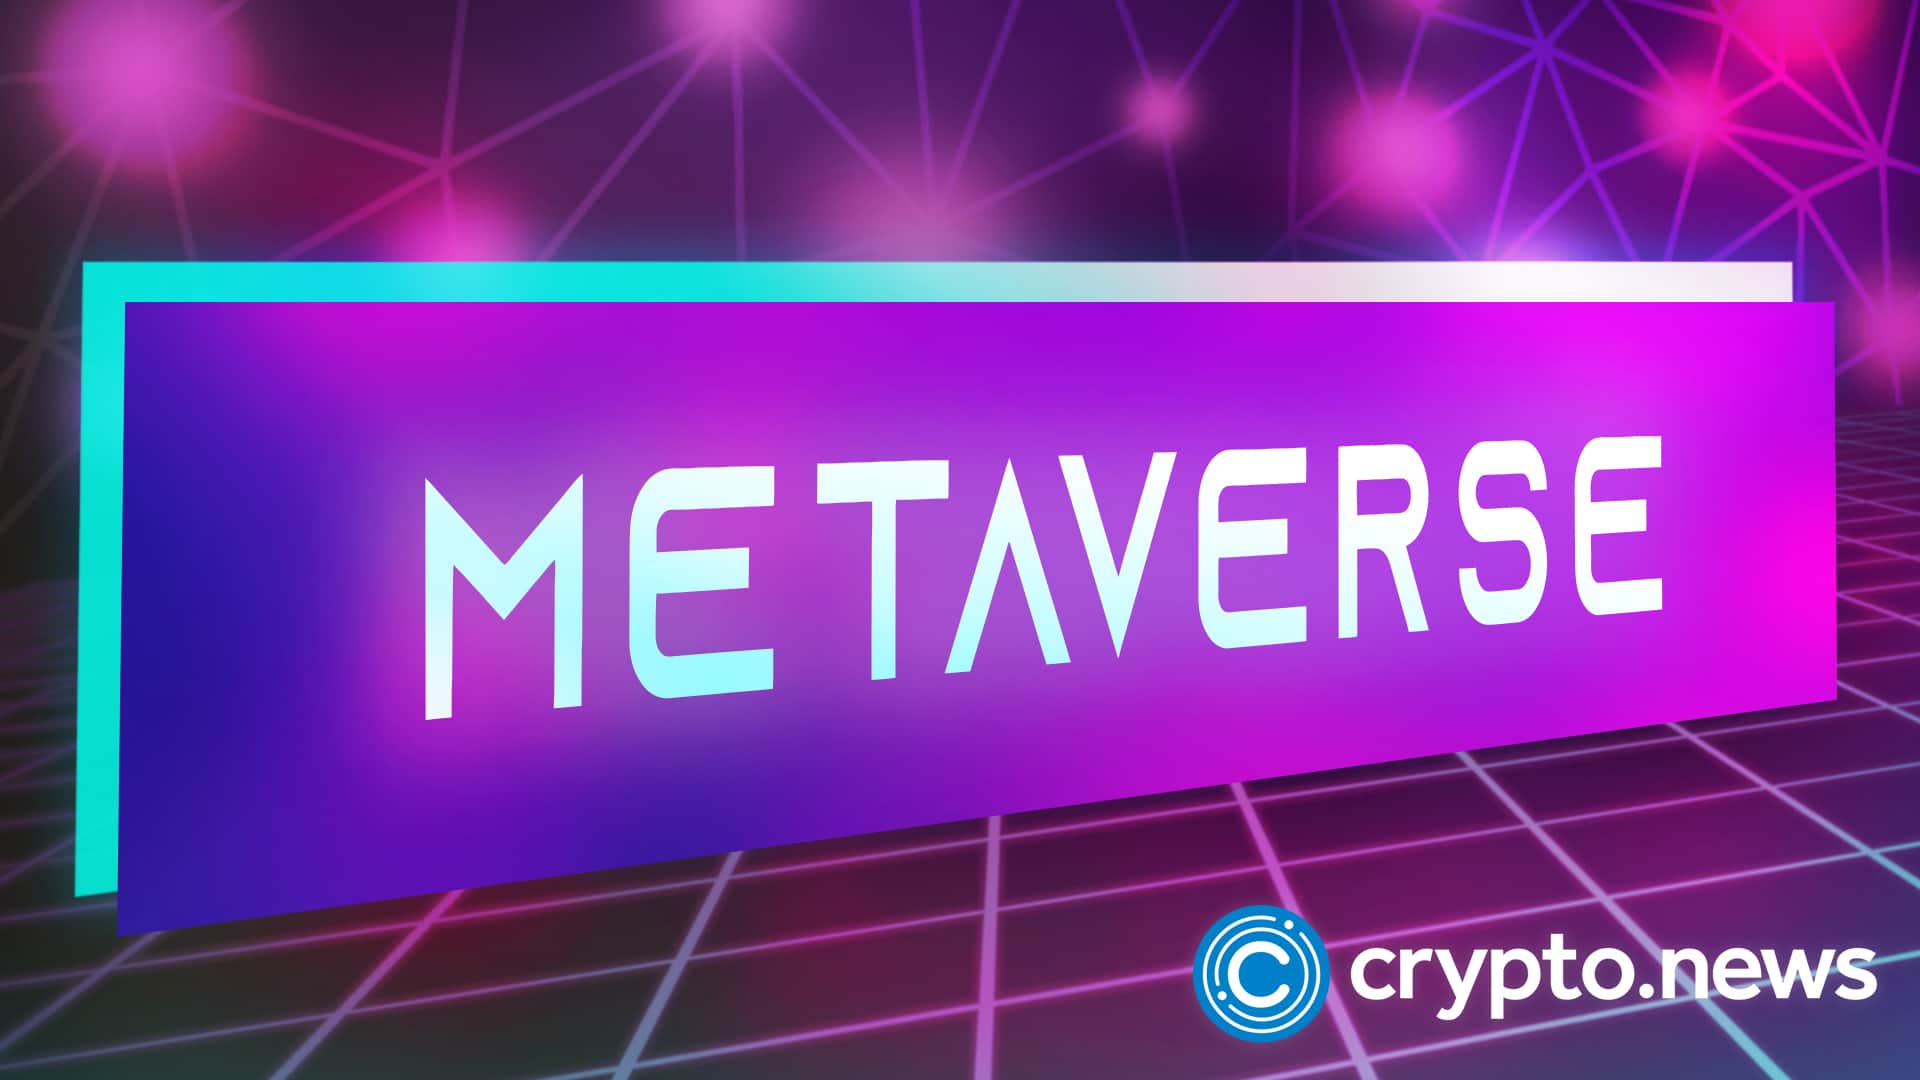 Metaverse App, Metas Flagship, Faces Bug Issues and Low-Quality Graphics